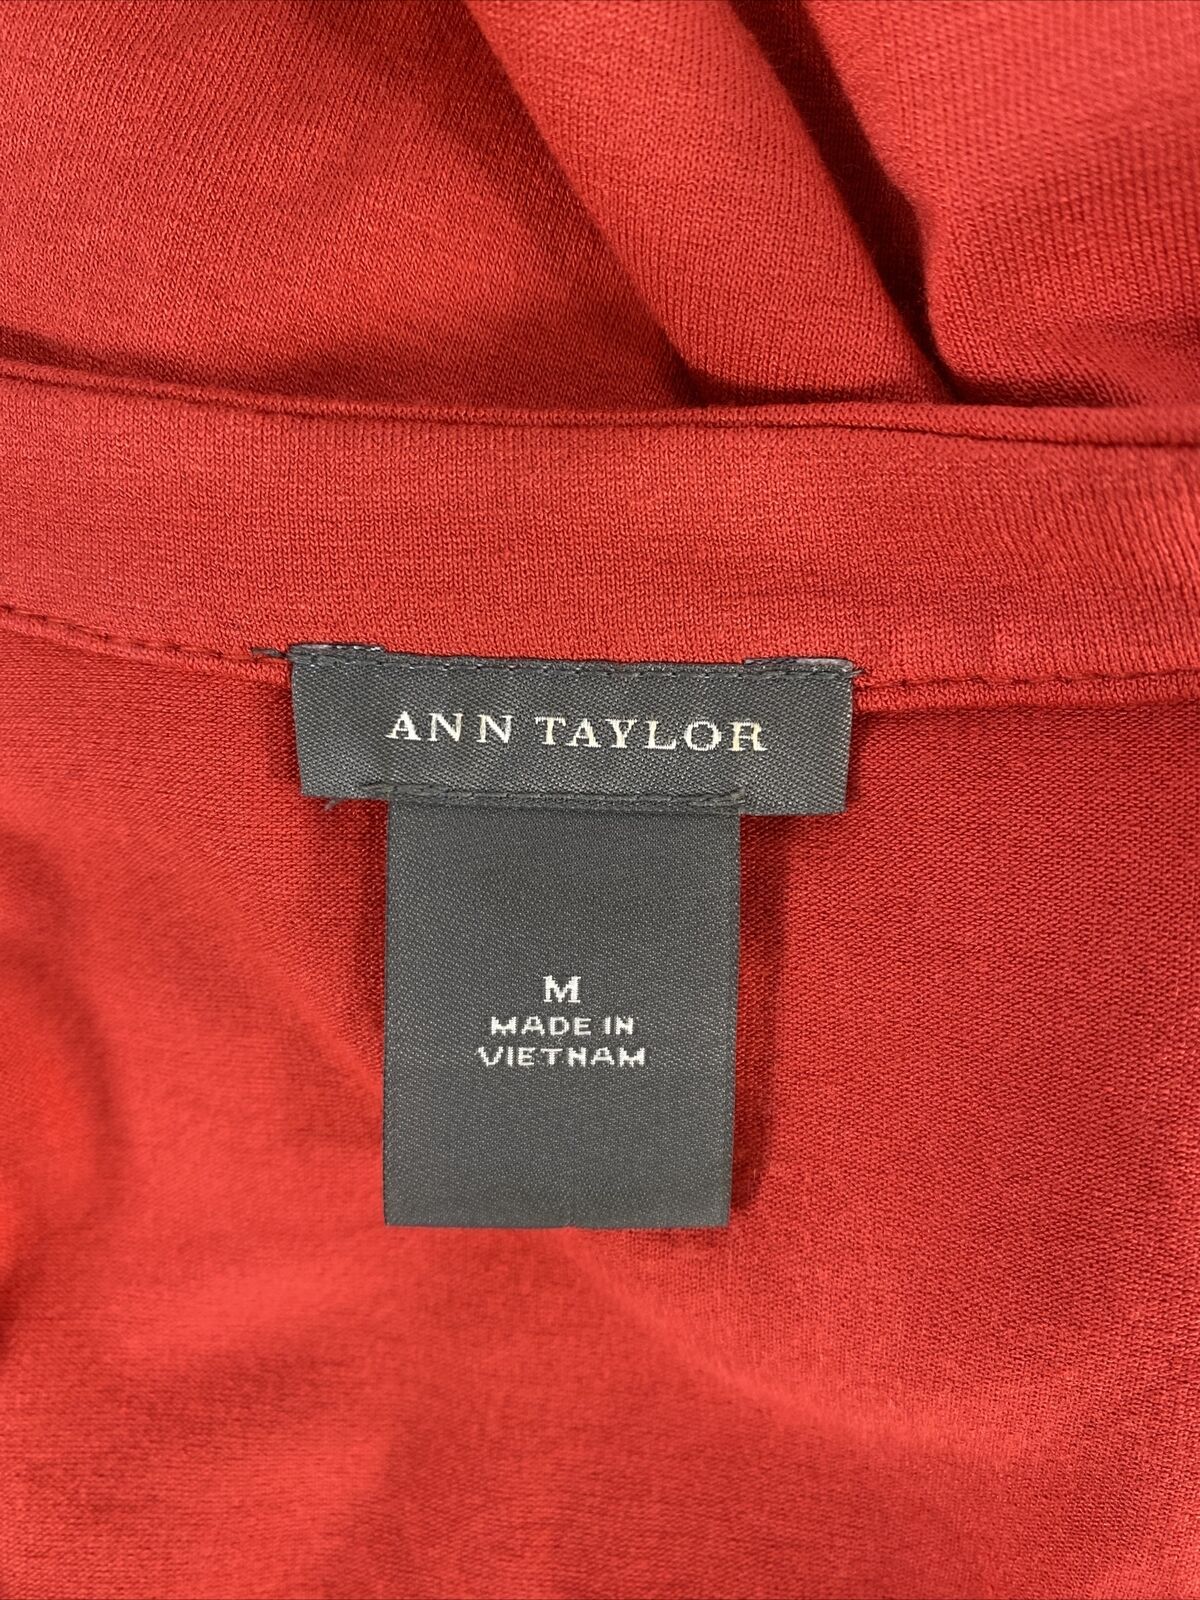 Ann Taylor Women's Red Ruffle Wrap Front V-Neck Blouse - M